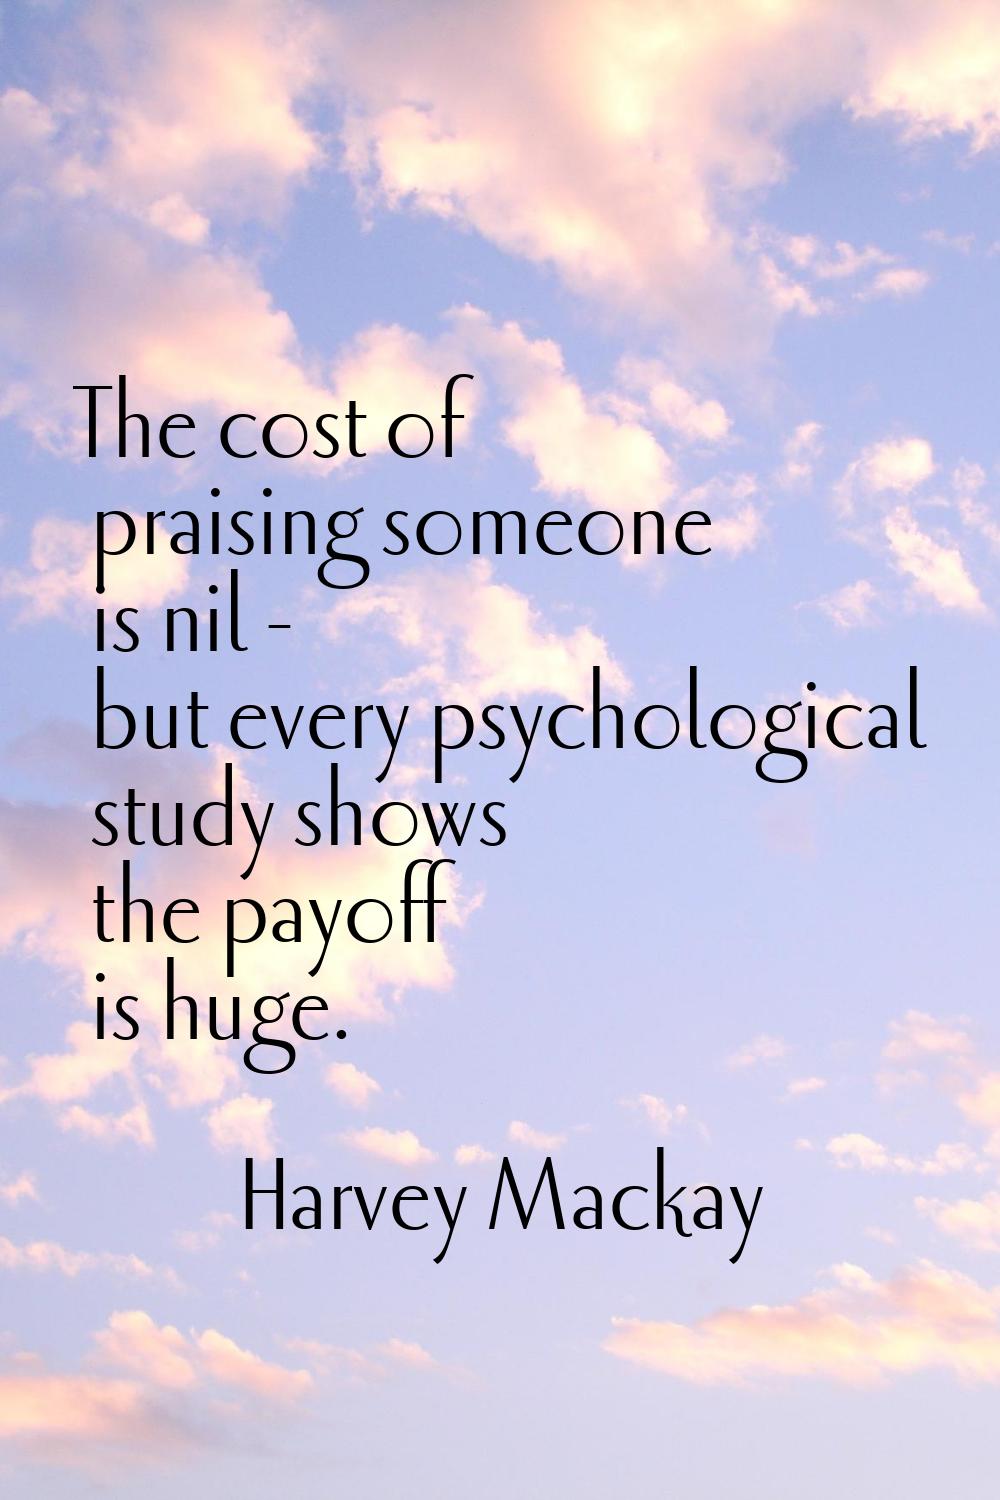 The cost of praising someone is nil - but every psychological study shows the payoff is huge.